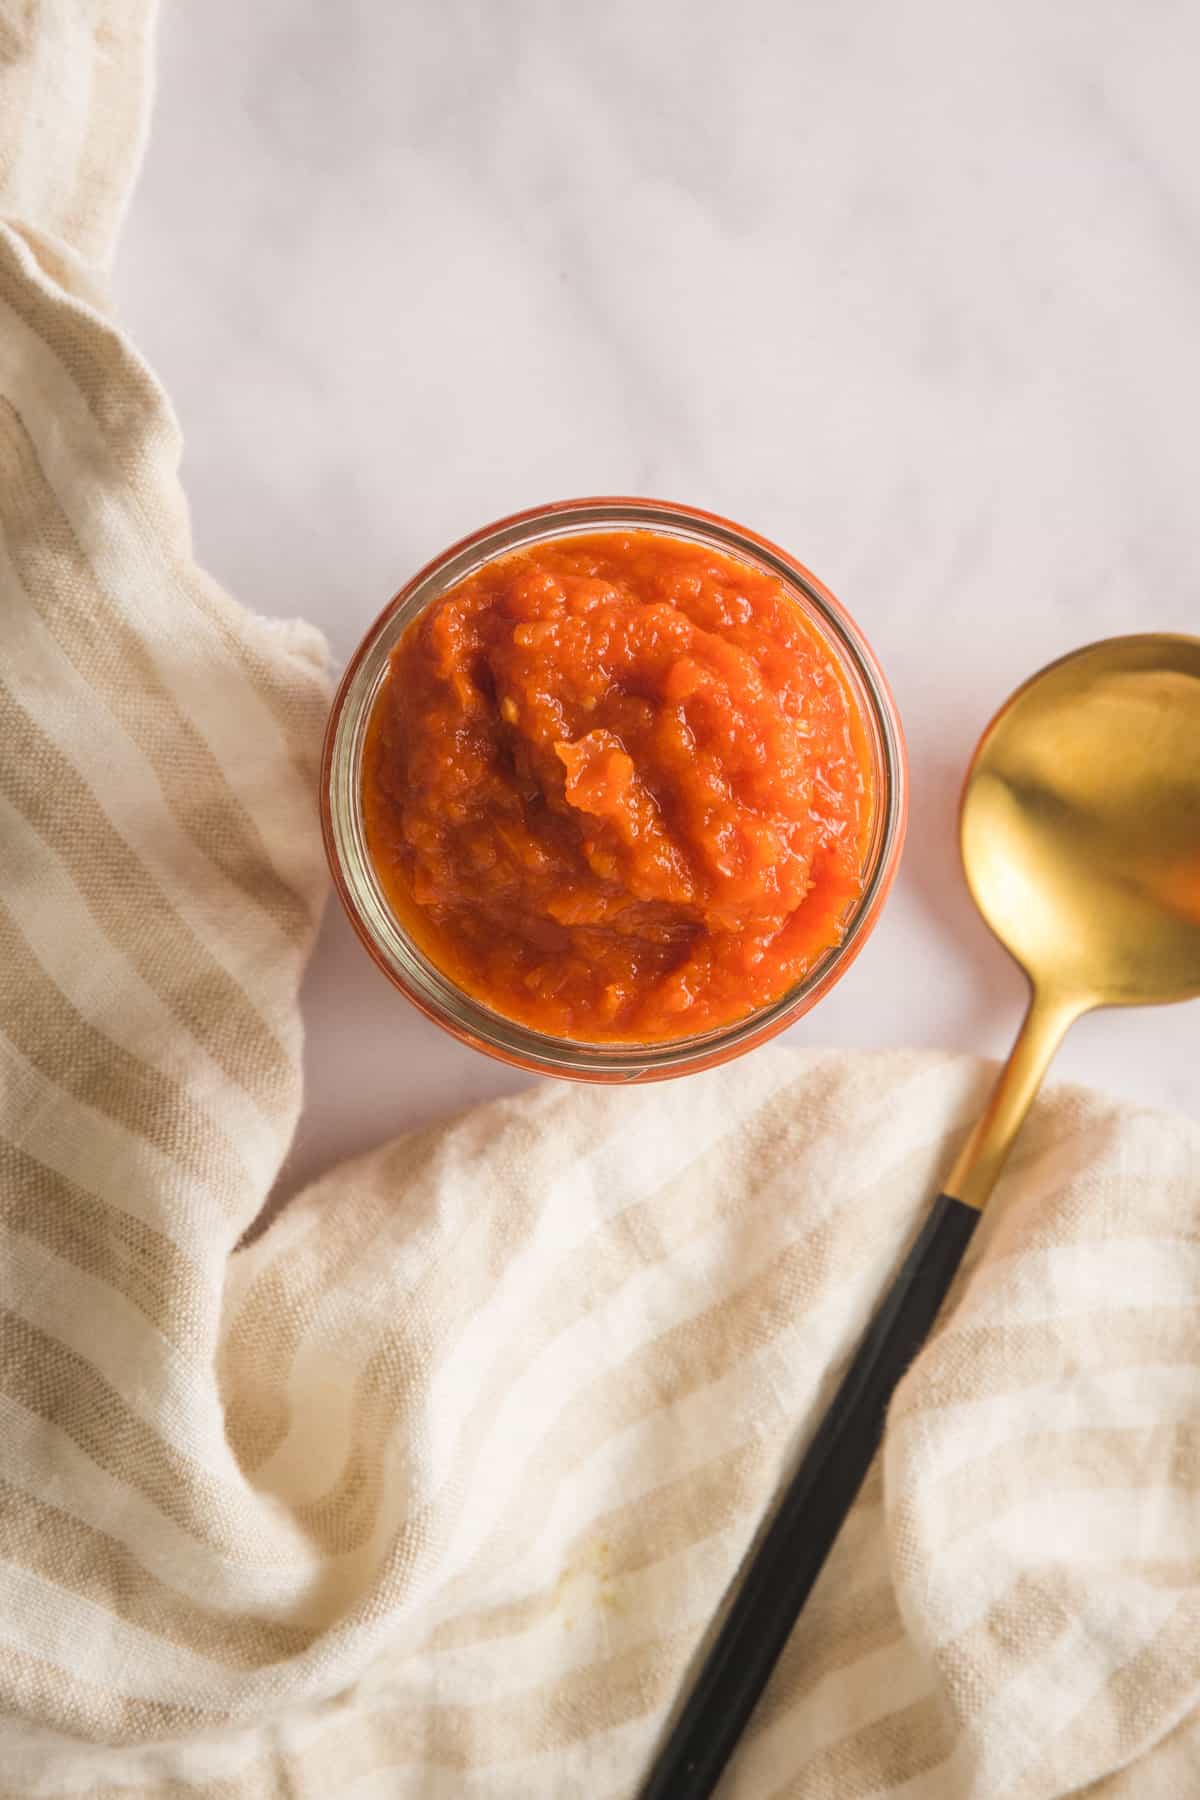 Overhead view of the sauce in a jar, with a golden black spoon on the side.